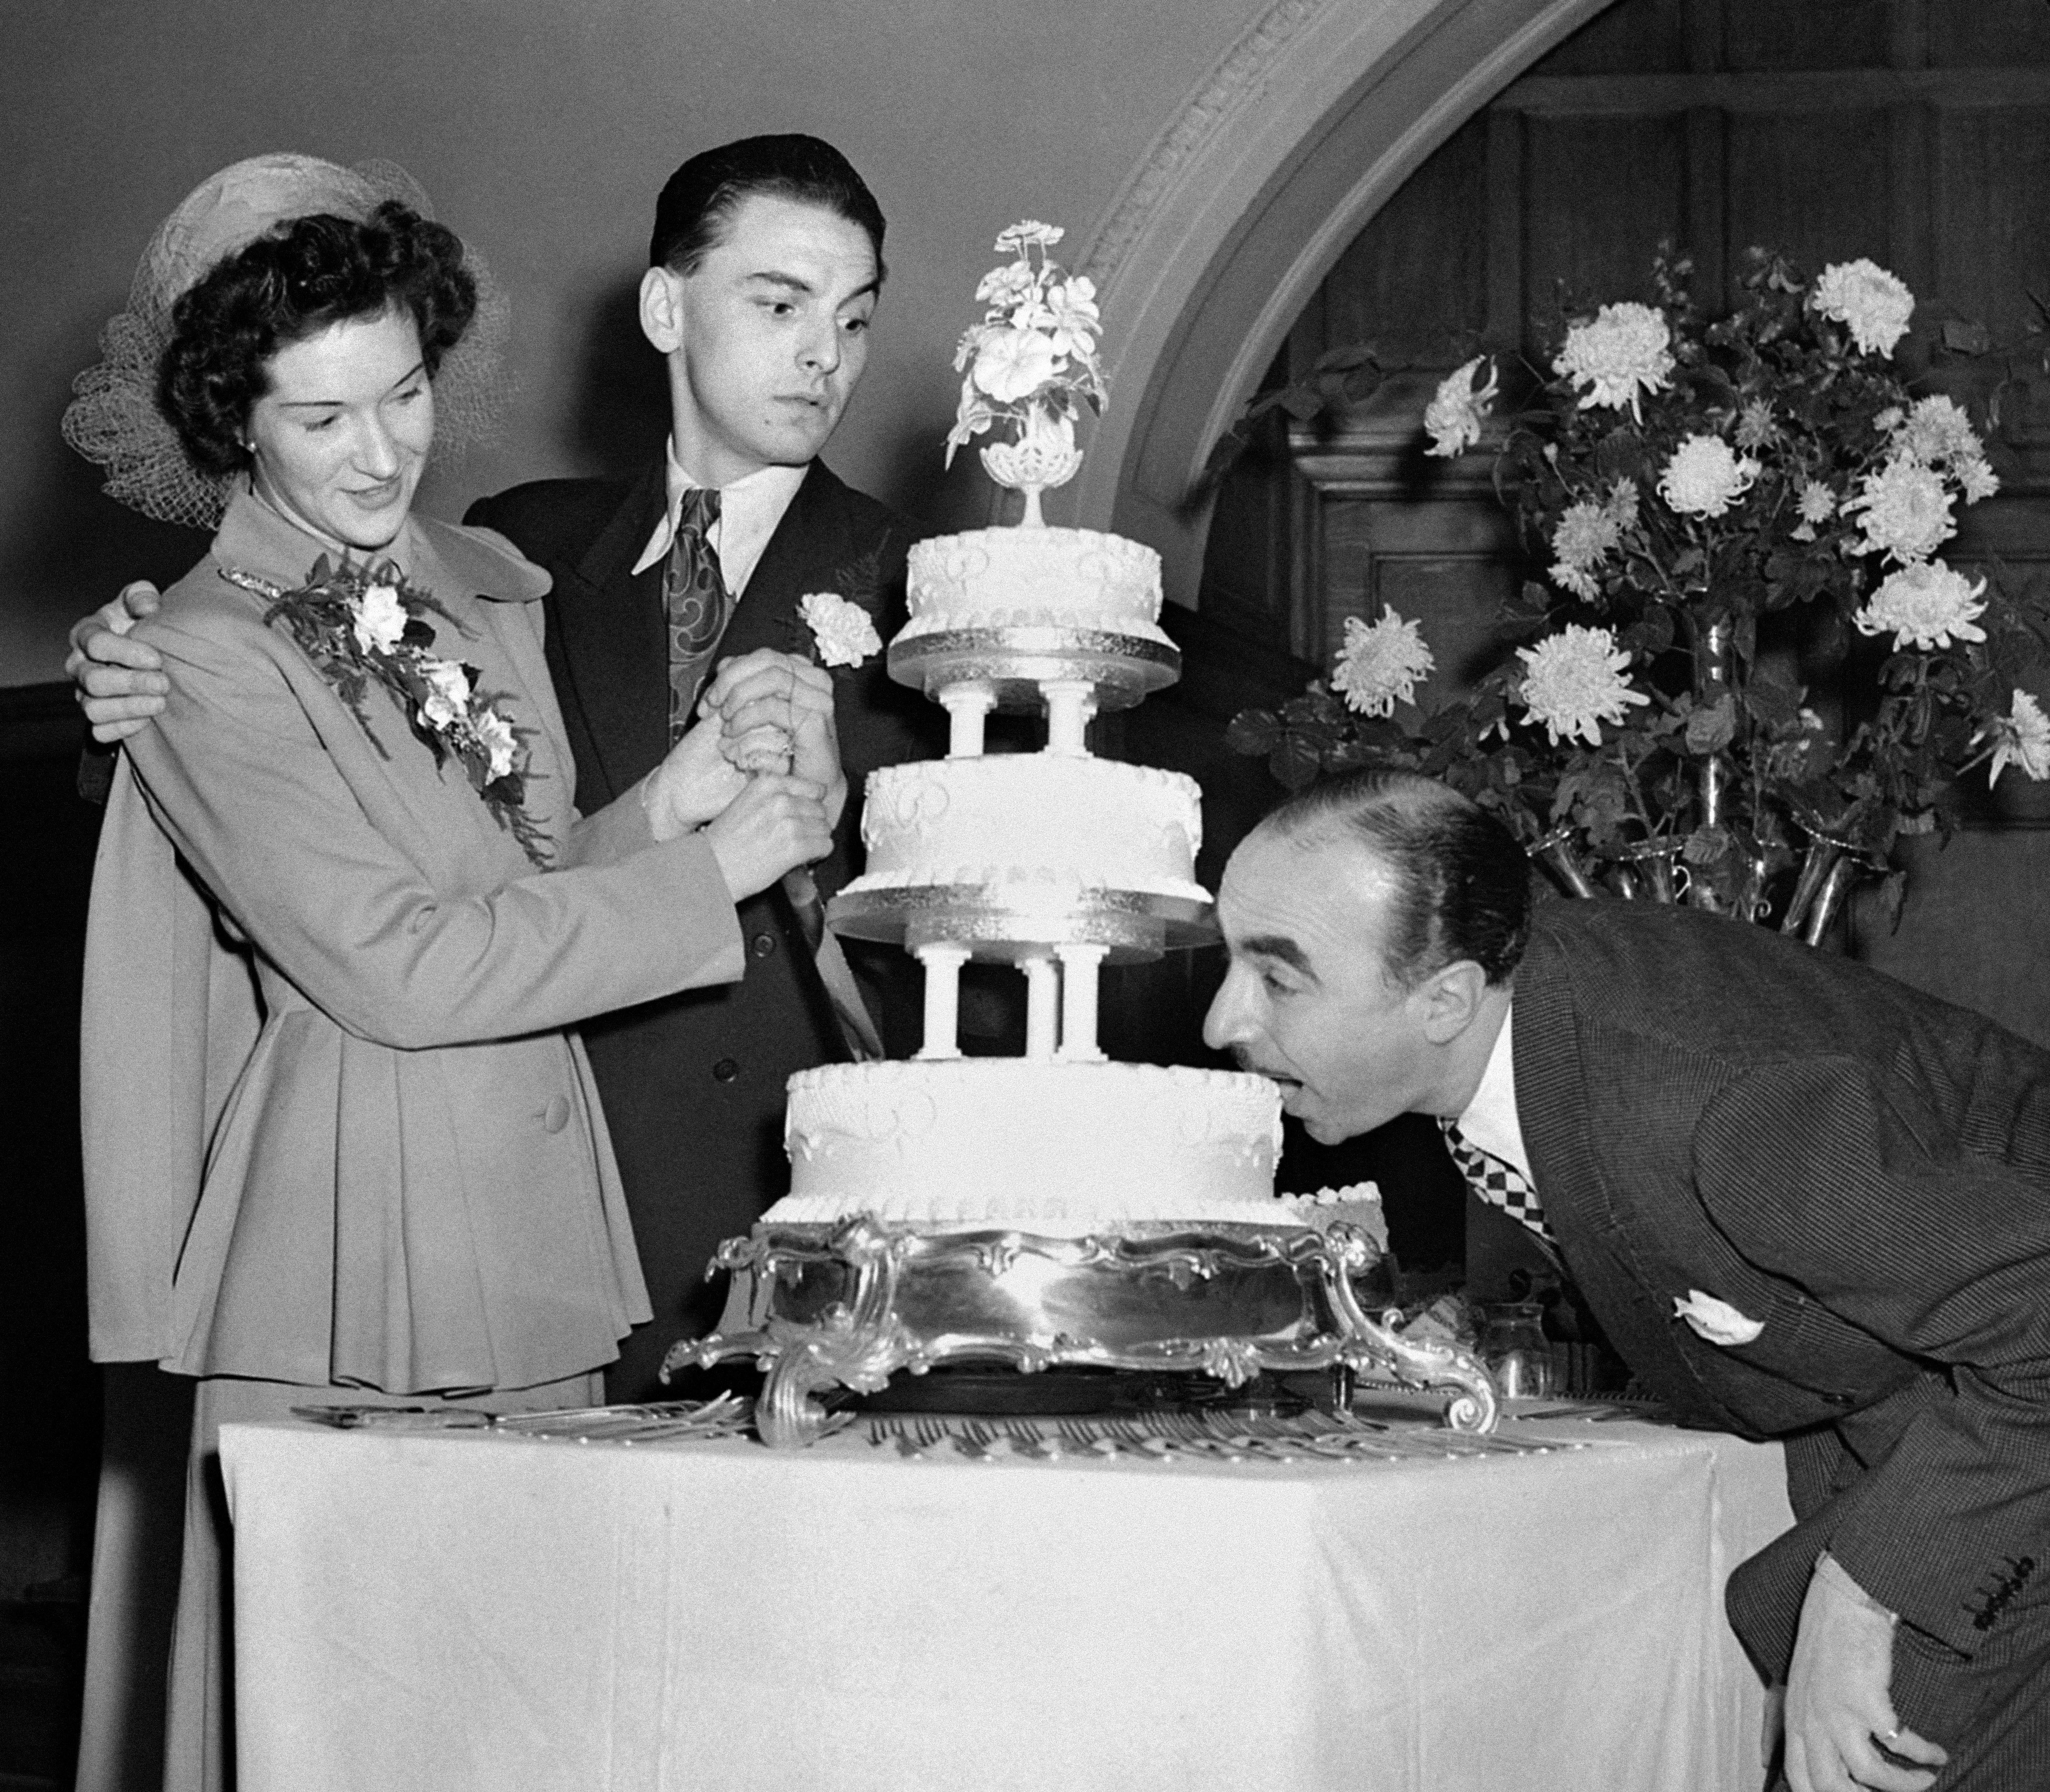 comedian Bob Monkhouse and his bride Elizabeth Thompson, a former nurse from Belfast at their wedding reception at Caxton Hall, London. Harold Berens is taking a bite of their cake as they attempt to cut it.